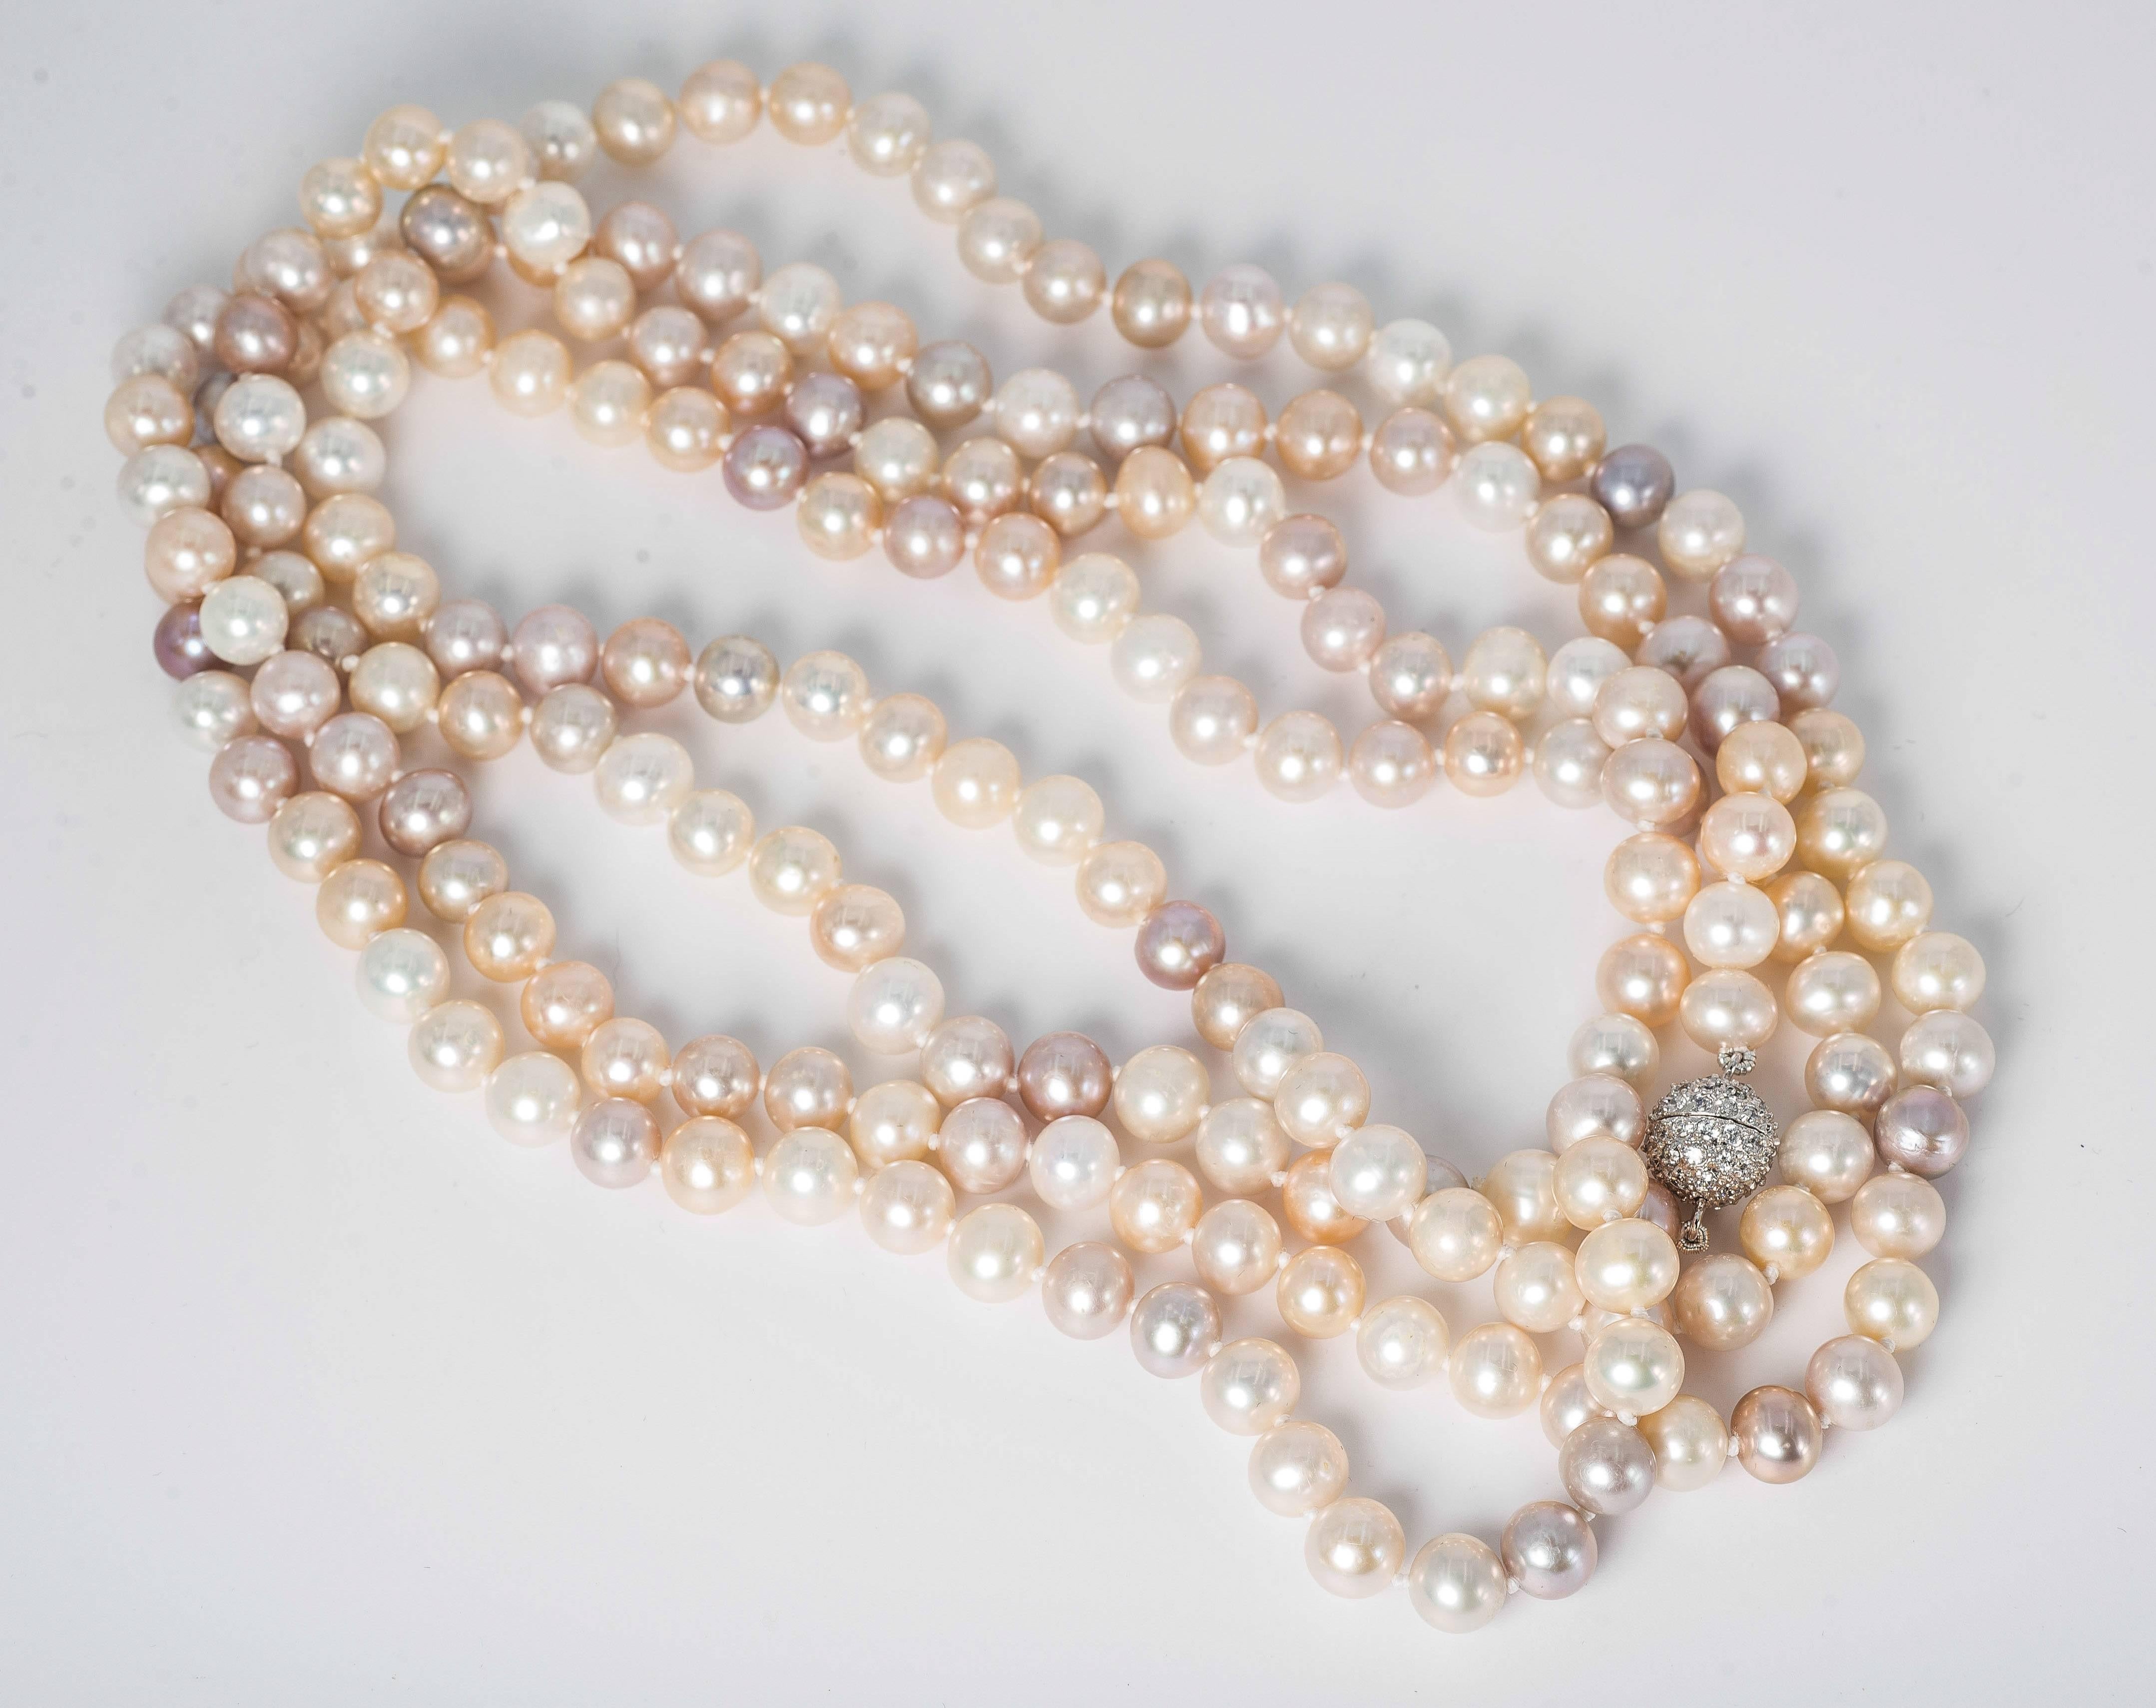 Elegant  Sixty Inch long rope of multi-shaded 8mm real freshwater pearls hand knotted to a pave cubic zircon screw ball clasp. Can be easily wrapped around 4 times a neckline